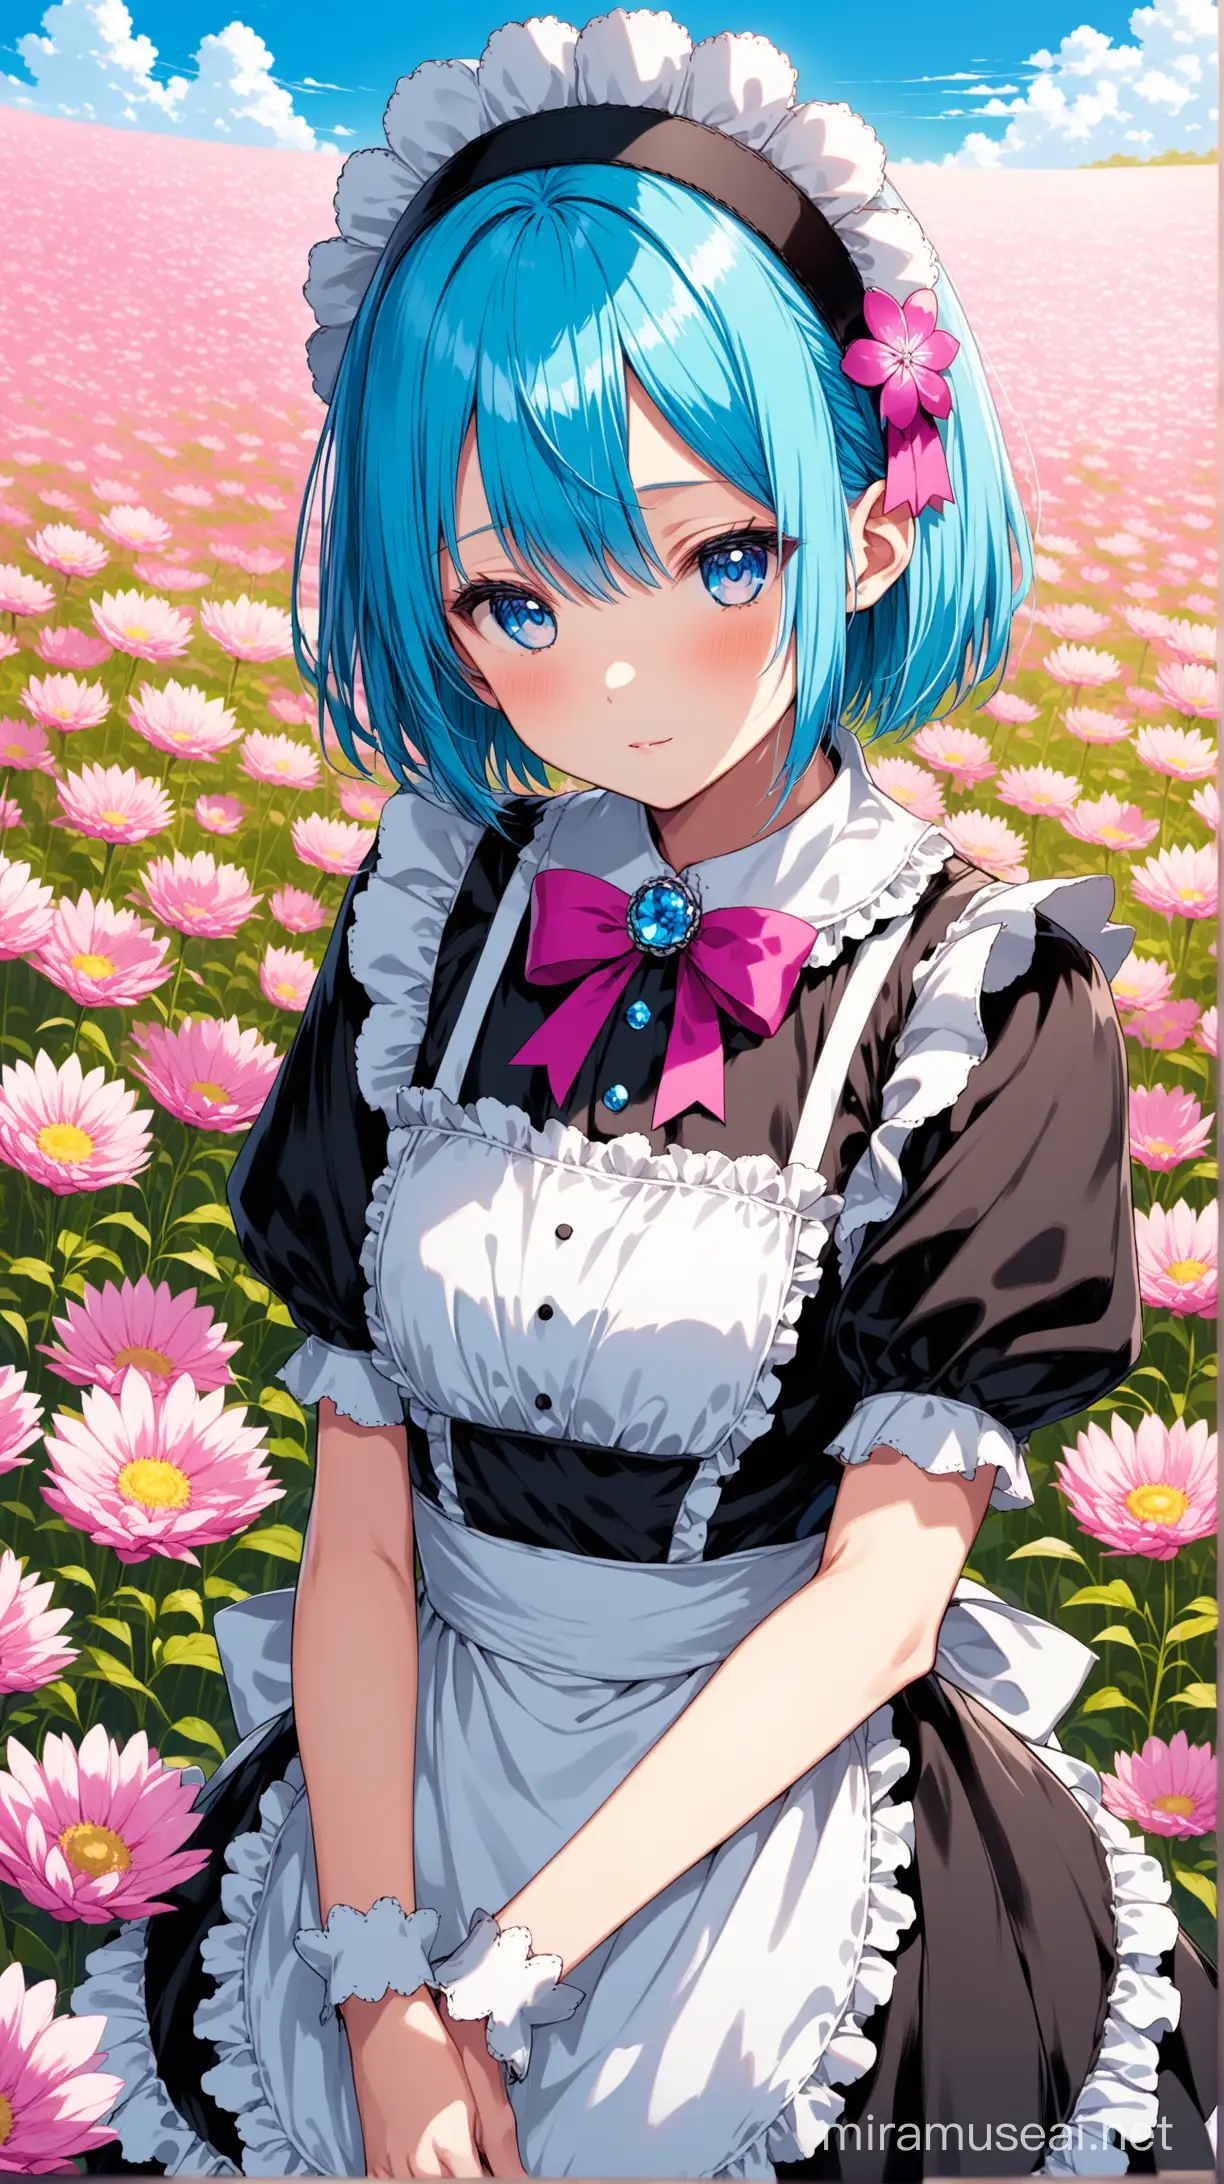 Whimsical Flower Field Adventure with BlueHaired Maid Rem